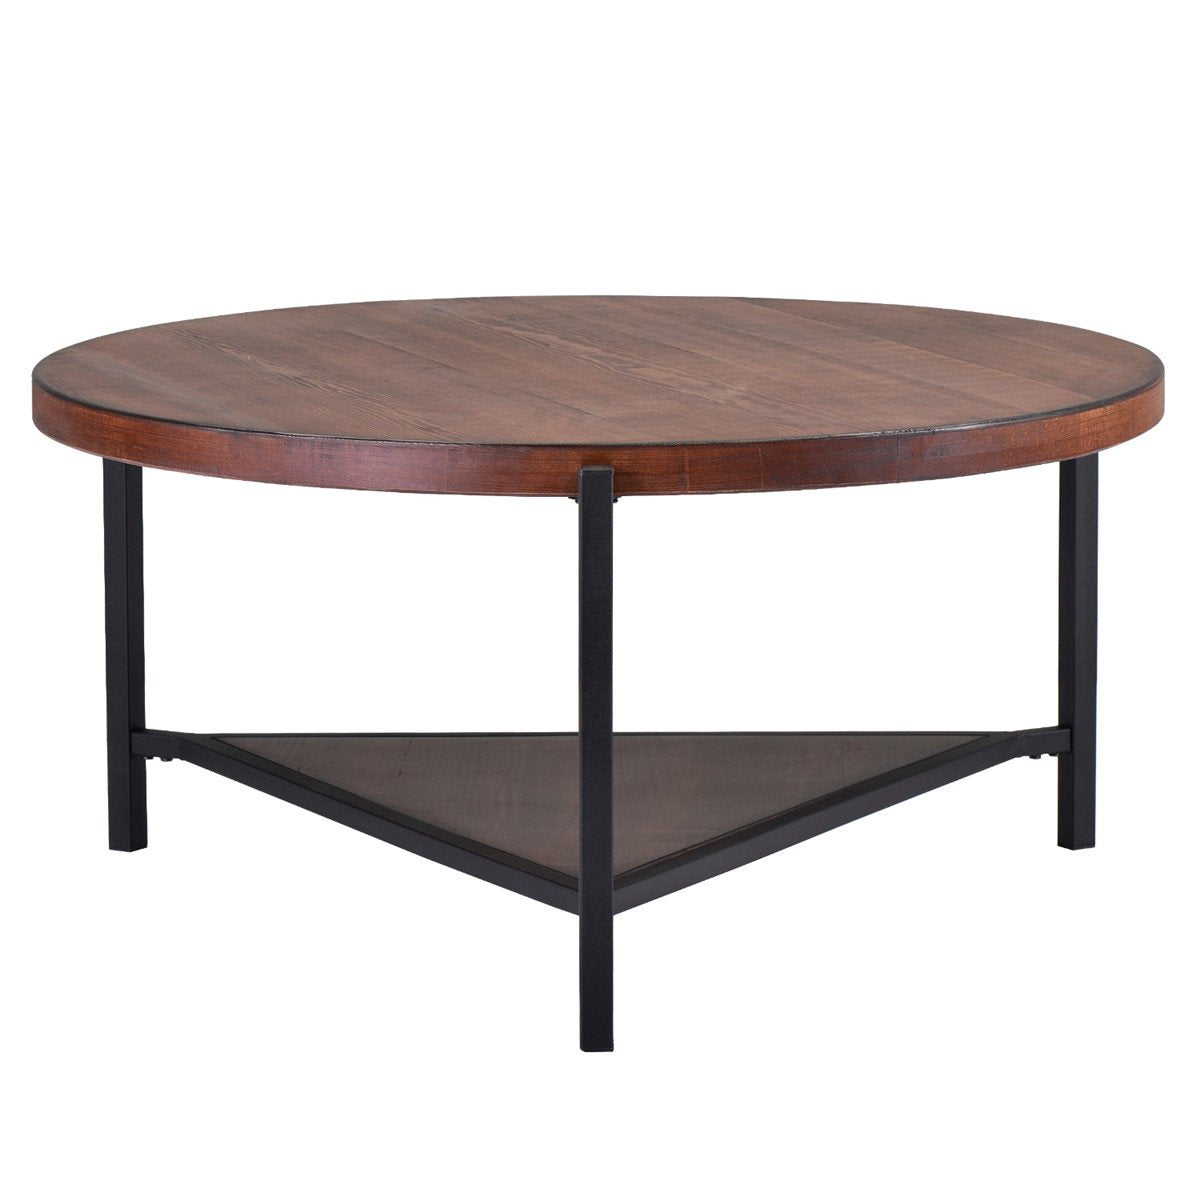 Coffee Table Round Industrial Design Metal Legs with Storage Open Shelf for Living Room